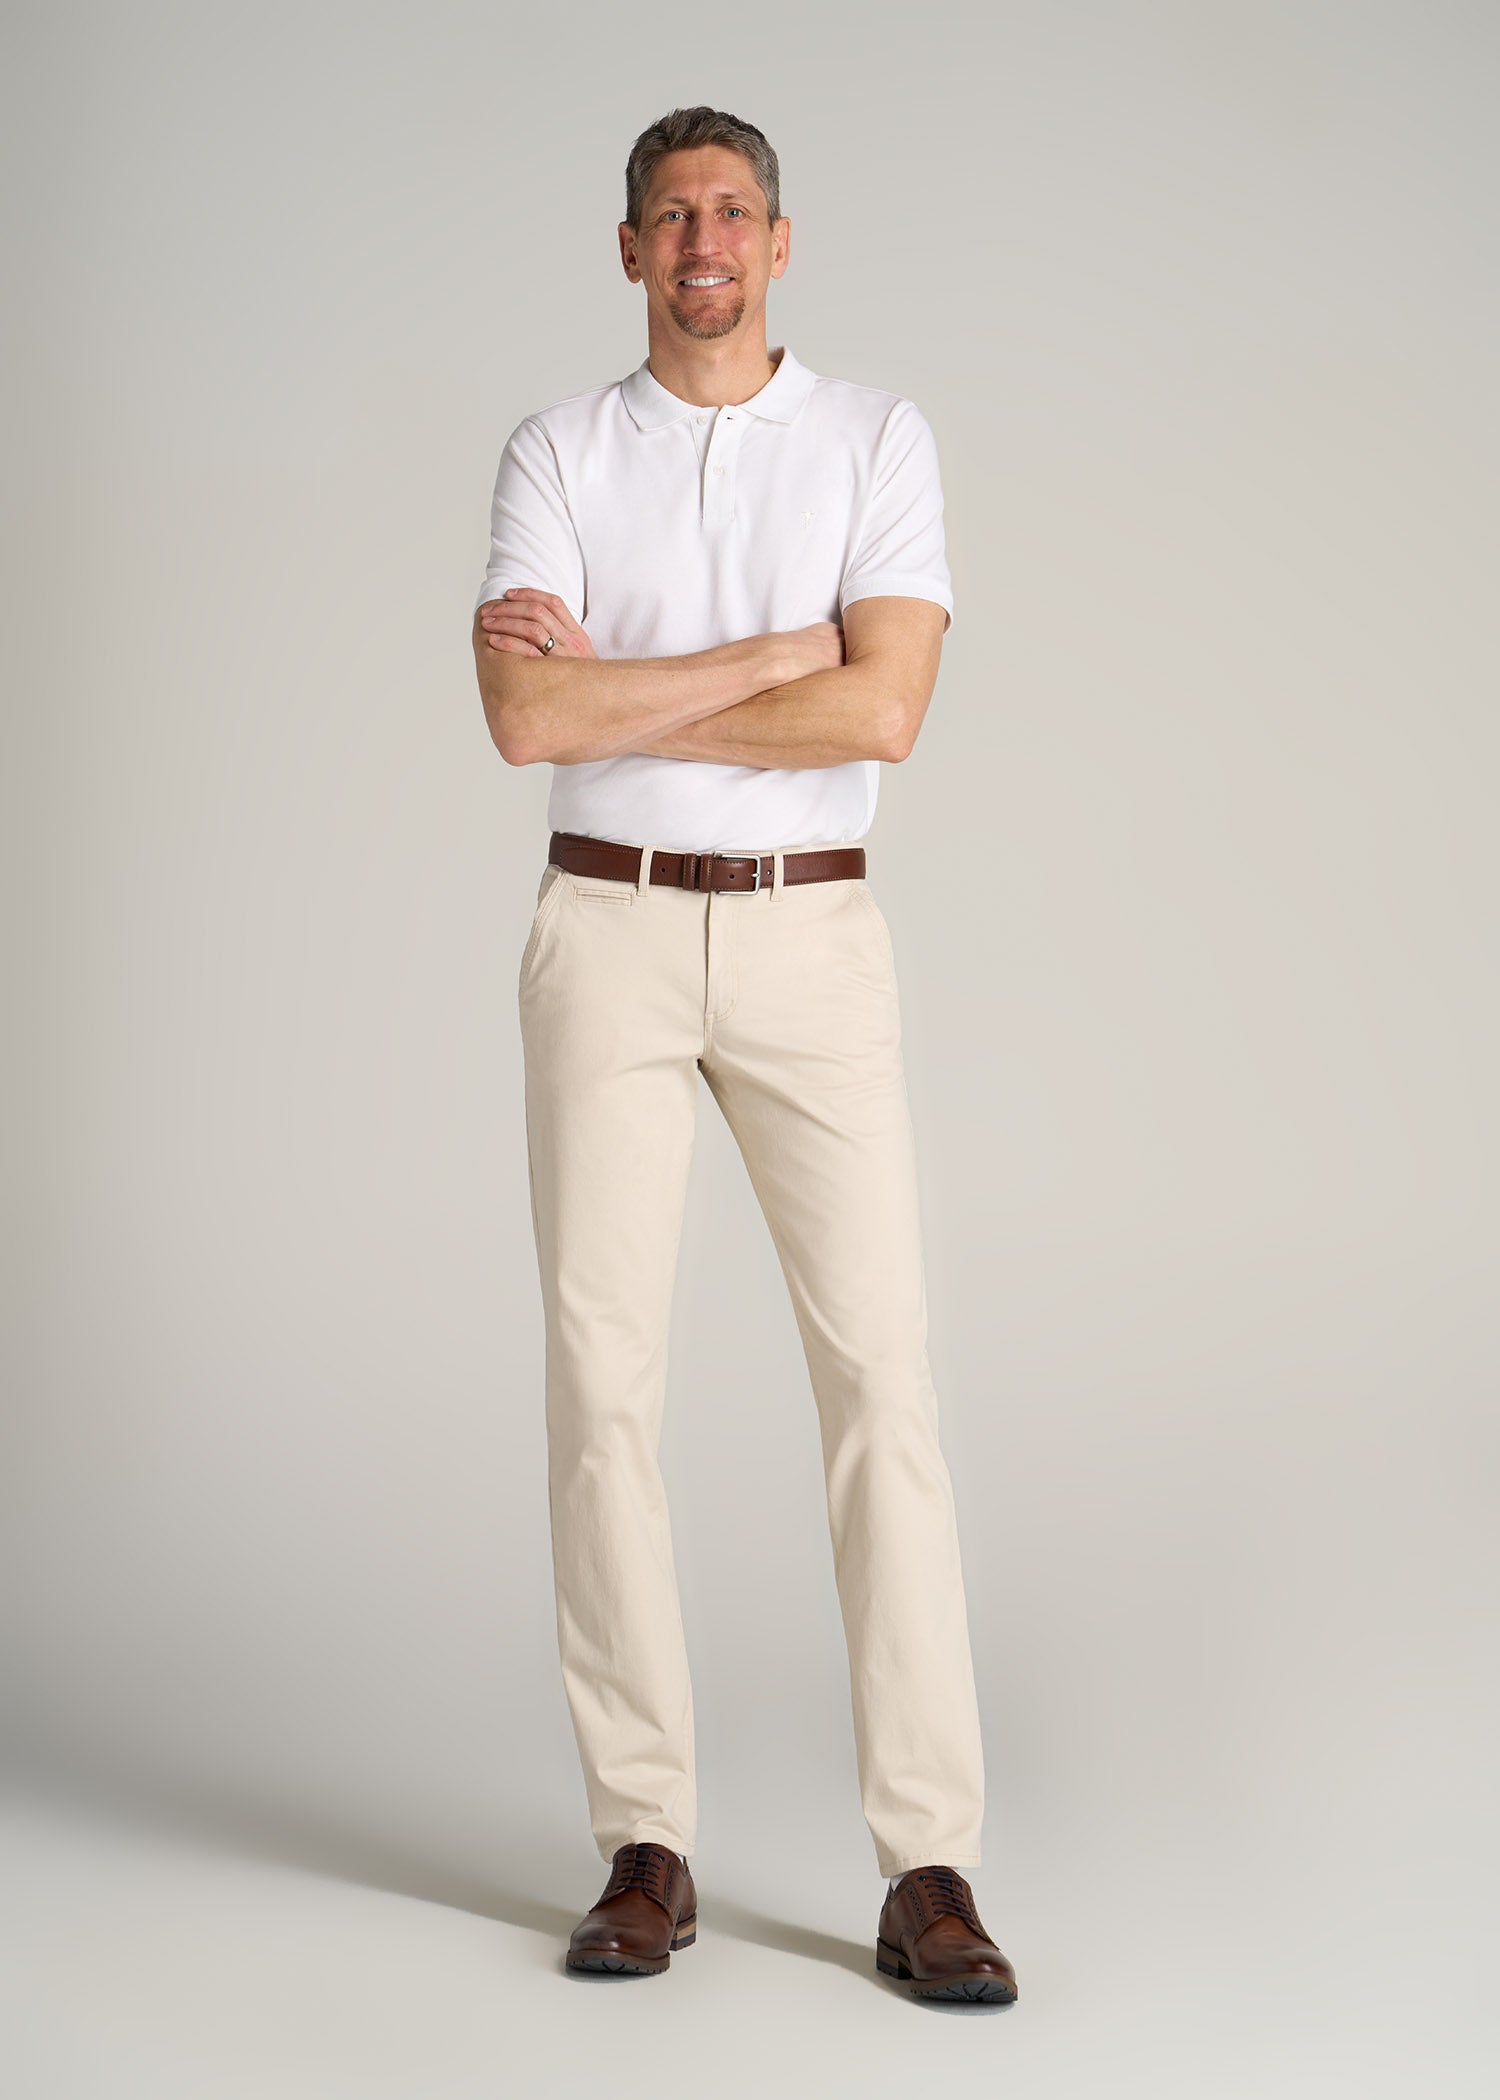 What color shirt should I wear with tan pants? - Quora